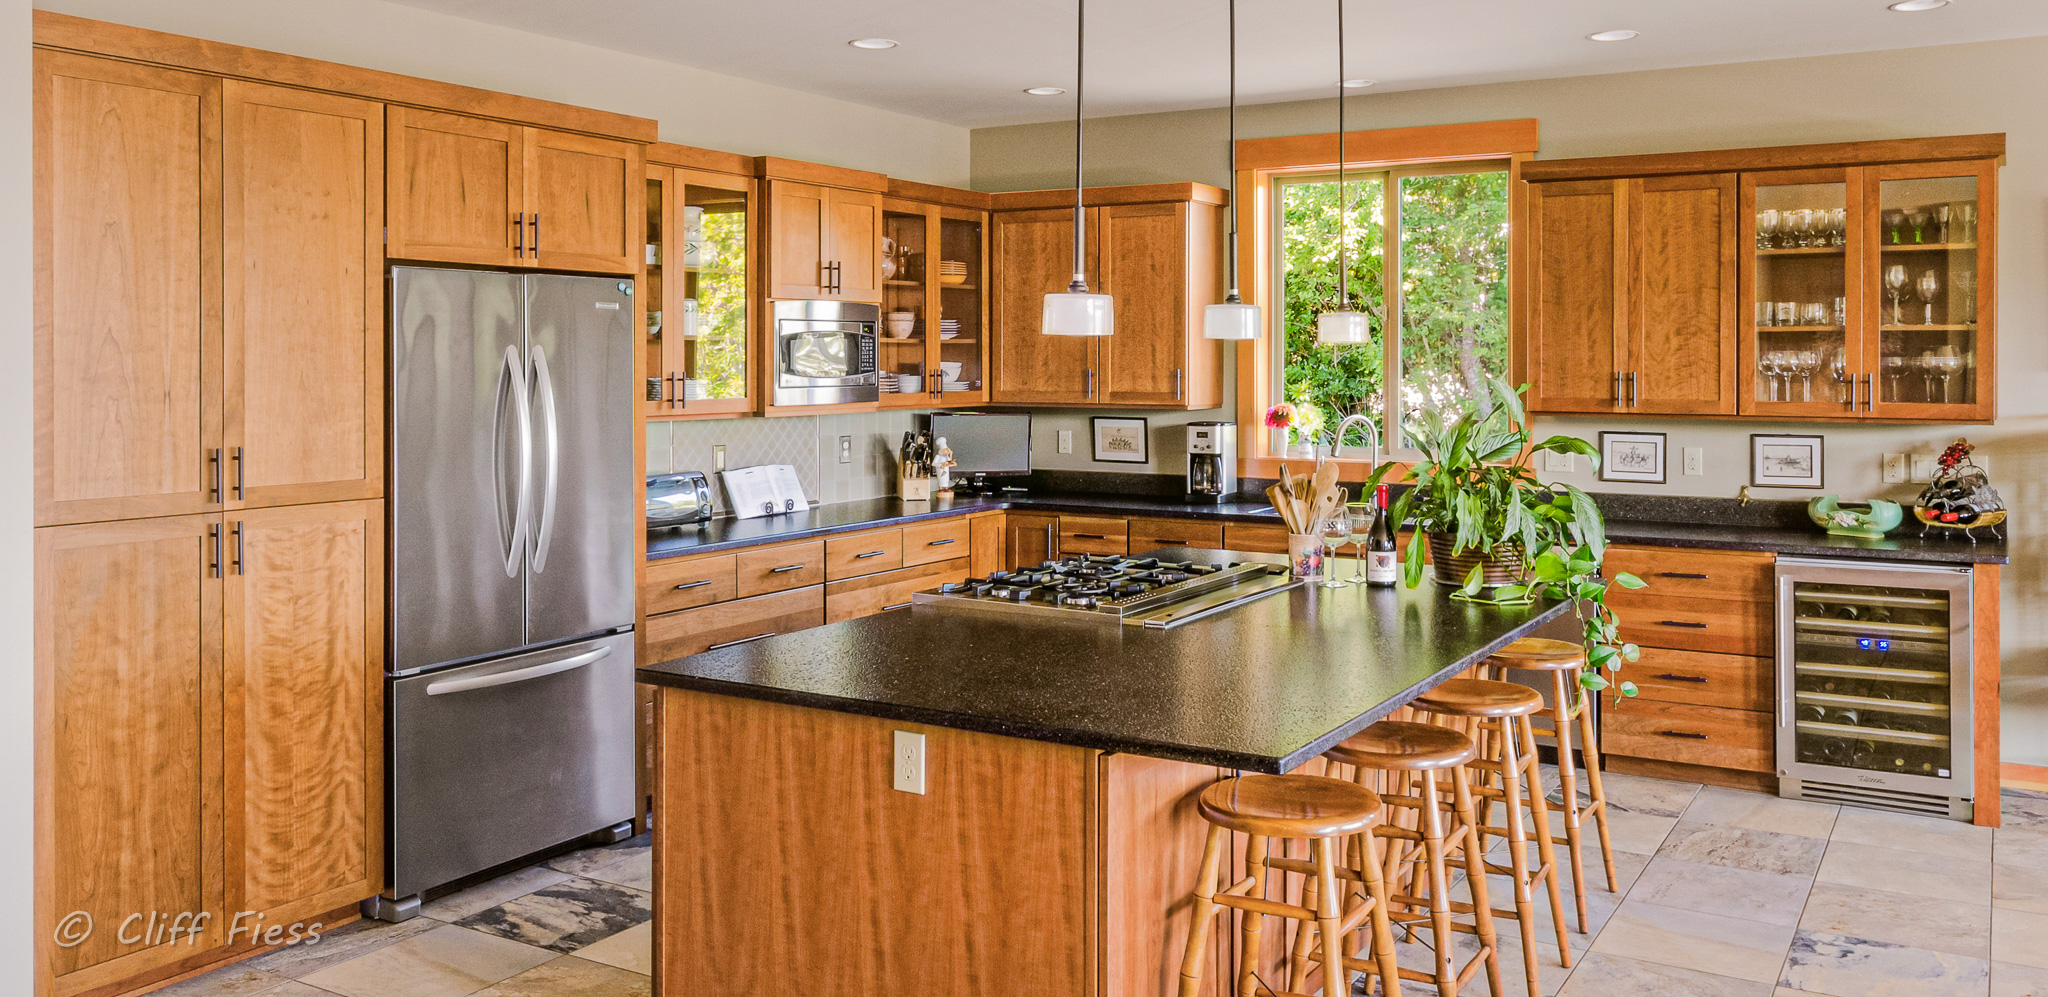 Kitchen of a Gig Harbor residence